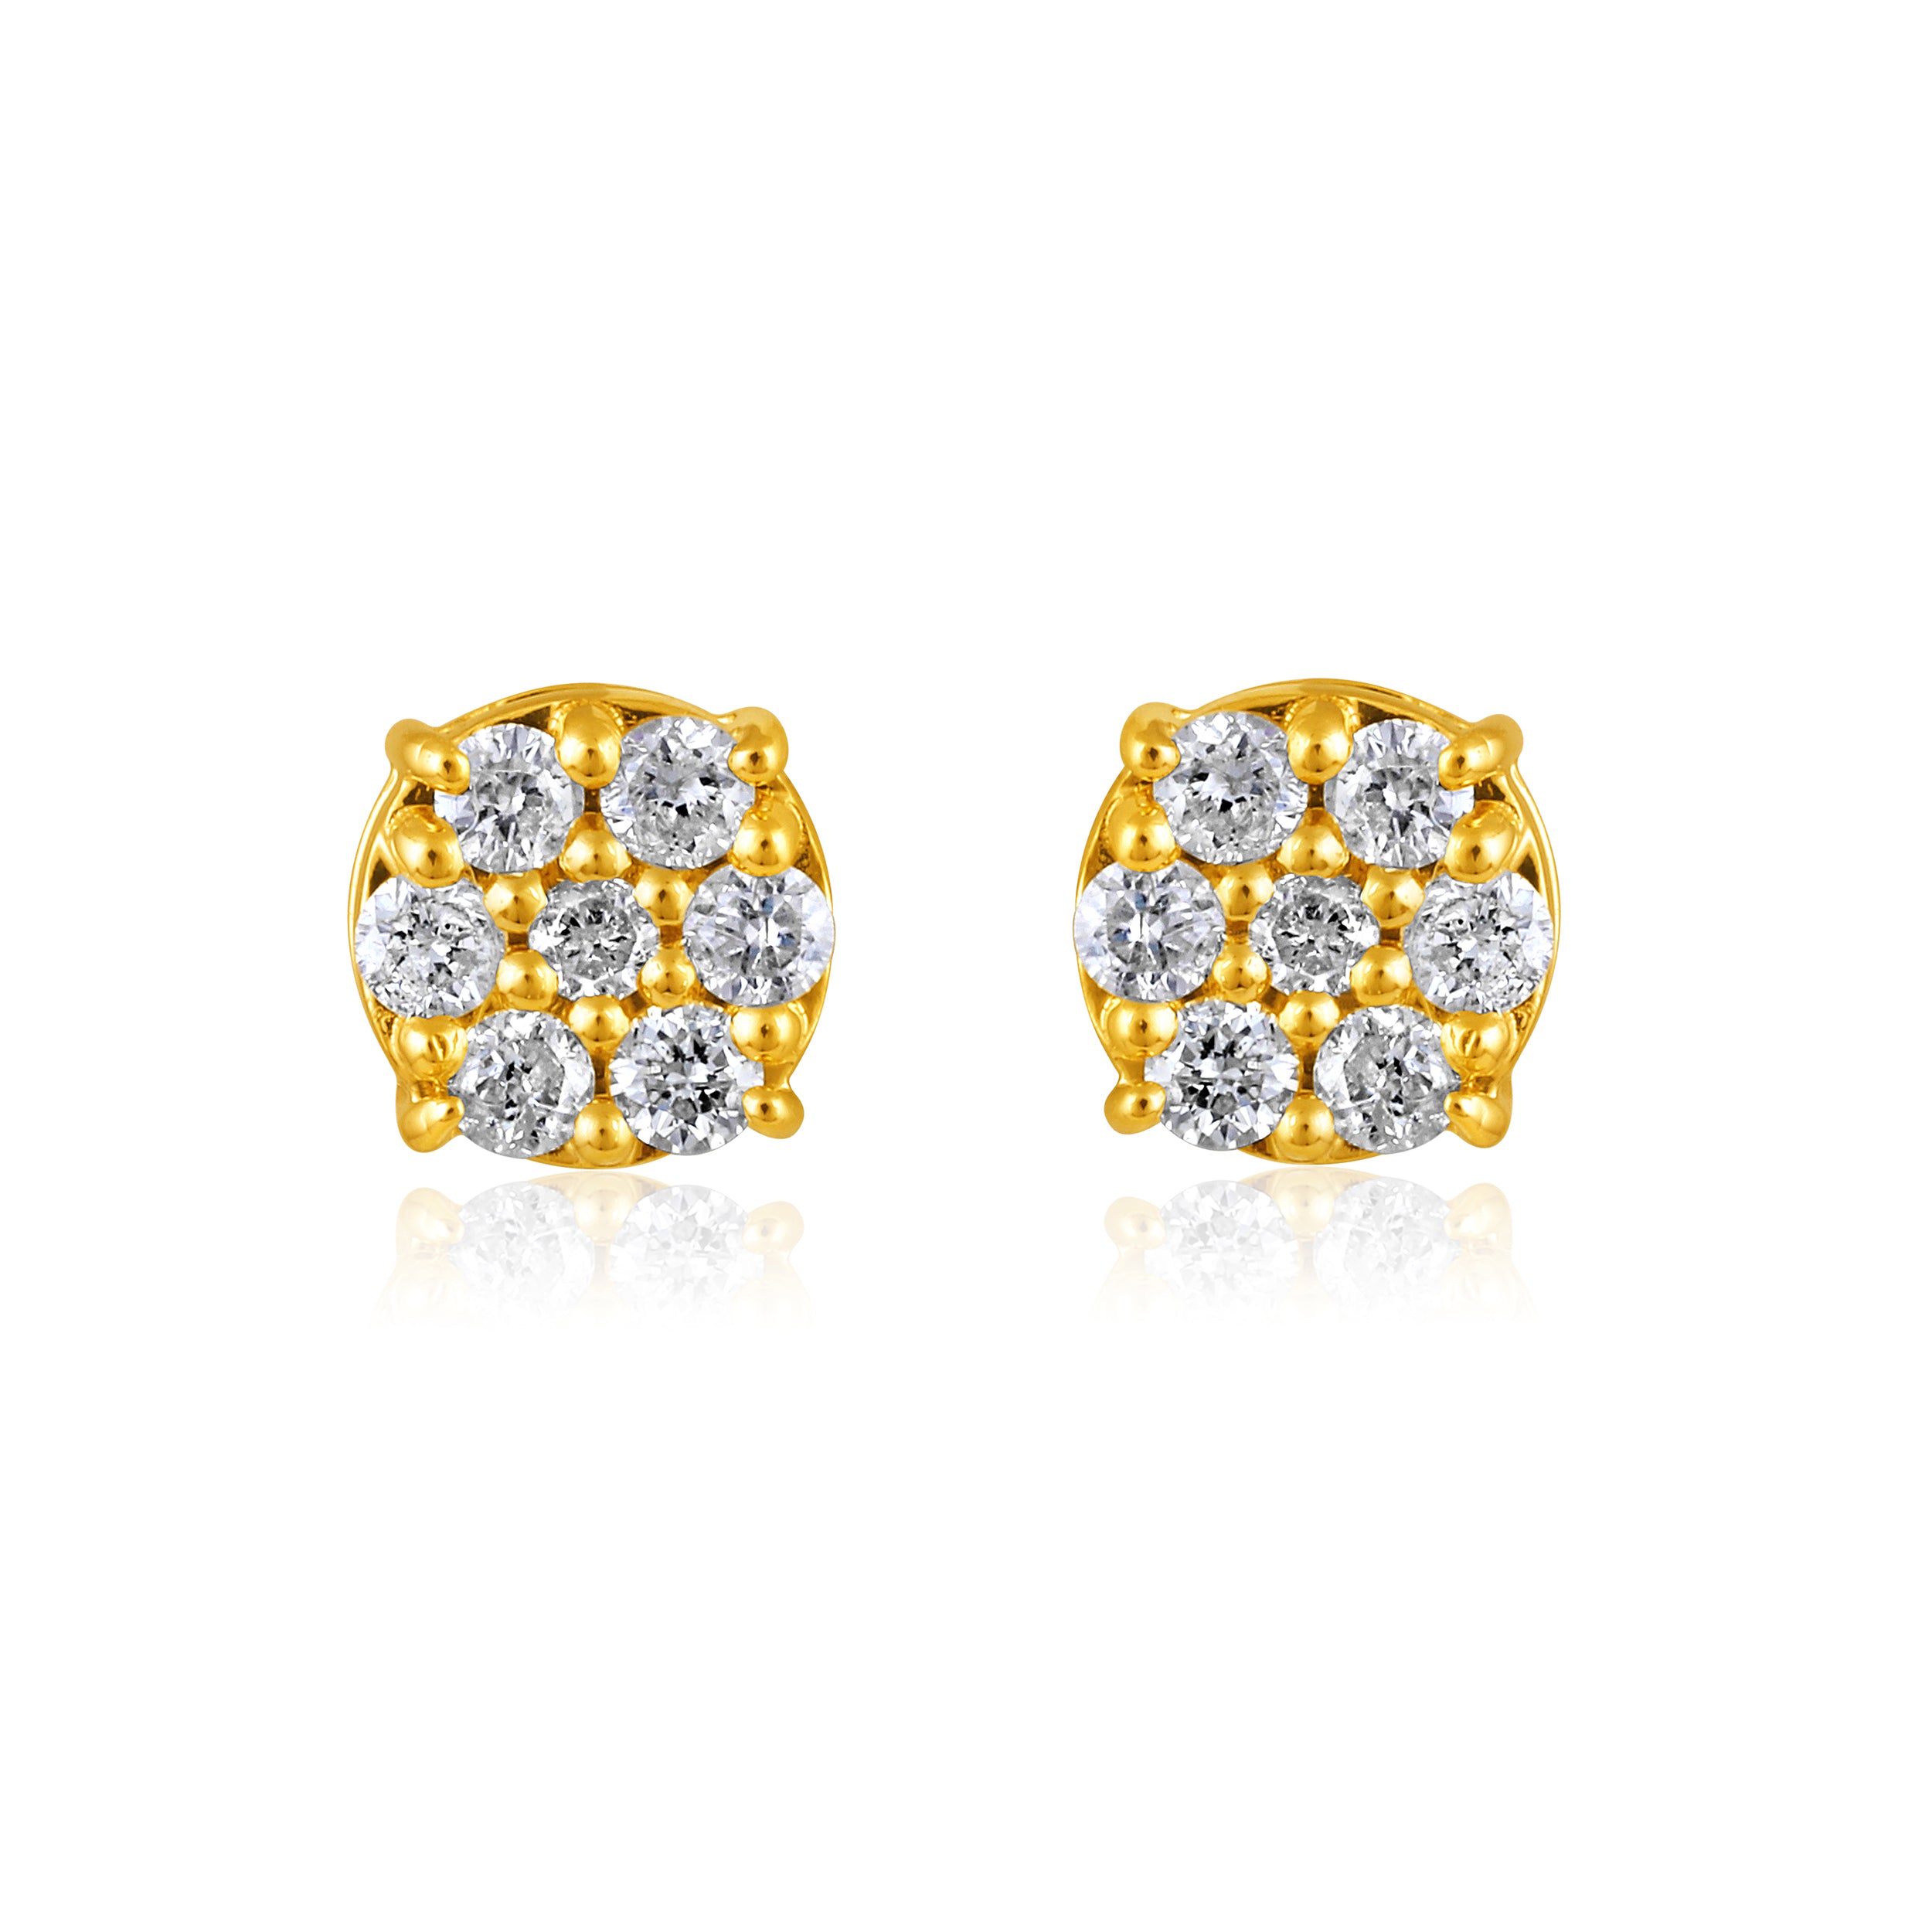 Certified 14K Gold 0.18ct Natural Diamond F-I1 Small Round Stud White Earrings